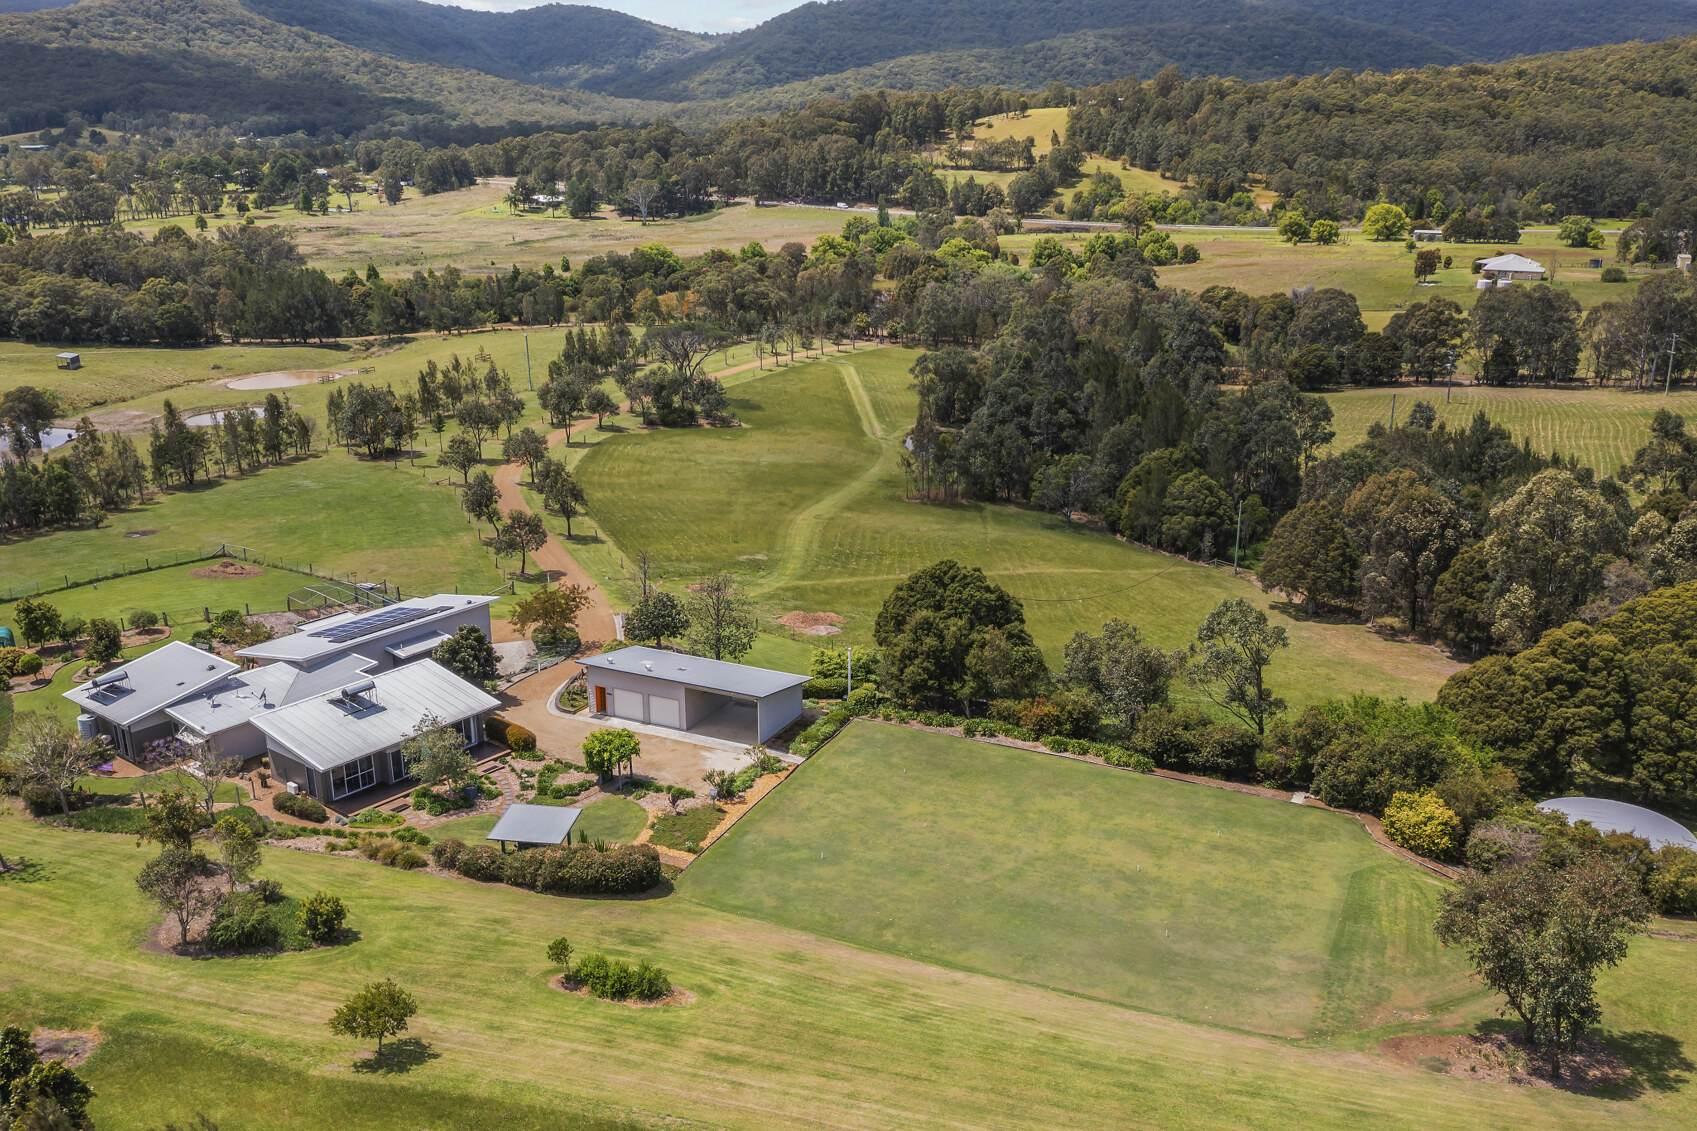 The rural property for sale in NSW's Hunter Valley boasts full-size croquet lawn which can also double as helicopter landing pad